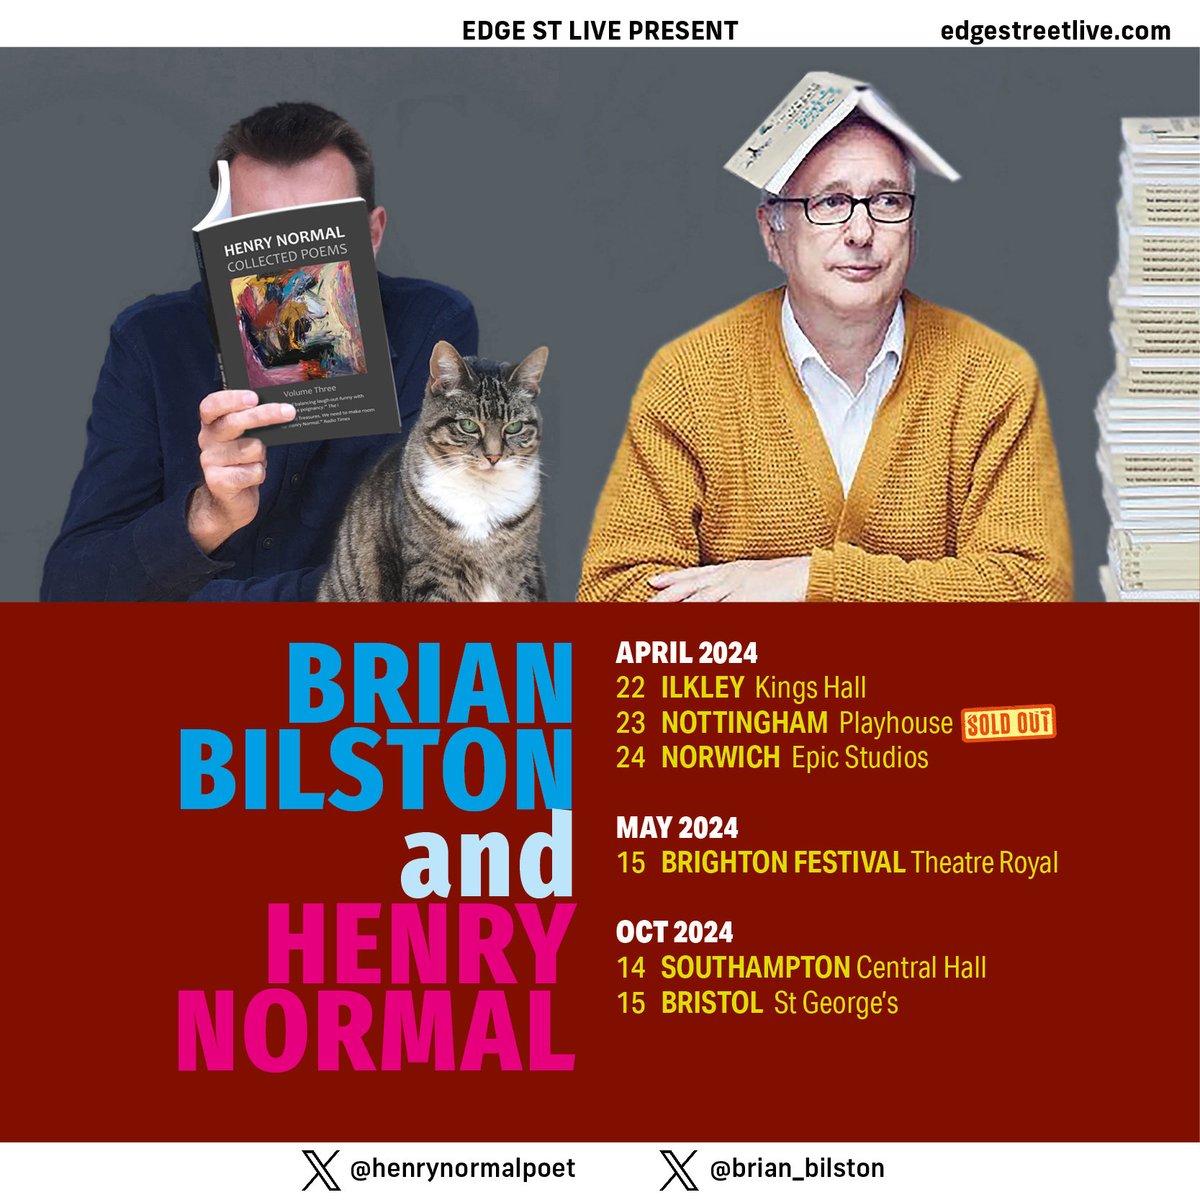 Only 5 chances left to see Brian Bilston and myself together. A few tickets left for Norwich. Brighton sold out in the Corn Exchange so we’ve moved the show to Theatre Royal to give more people a chance to come along.